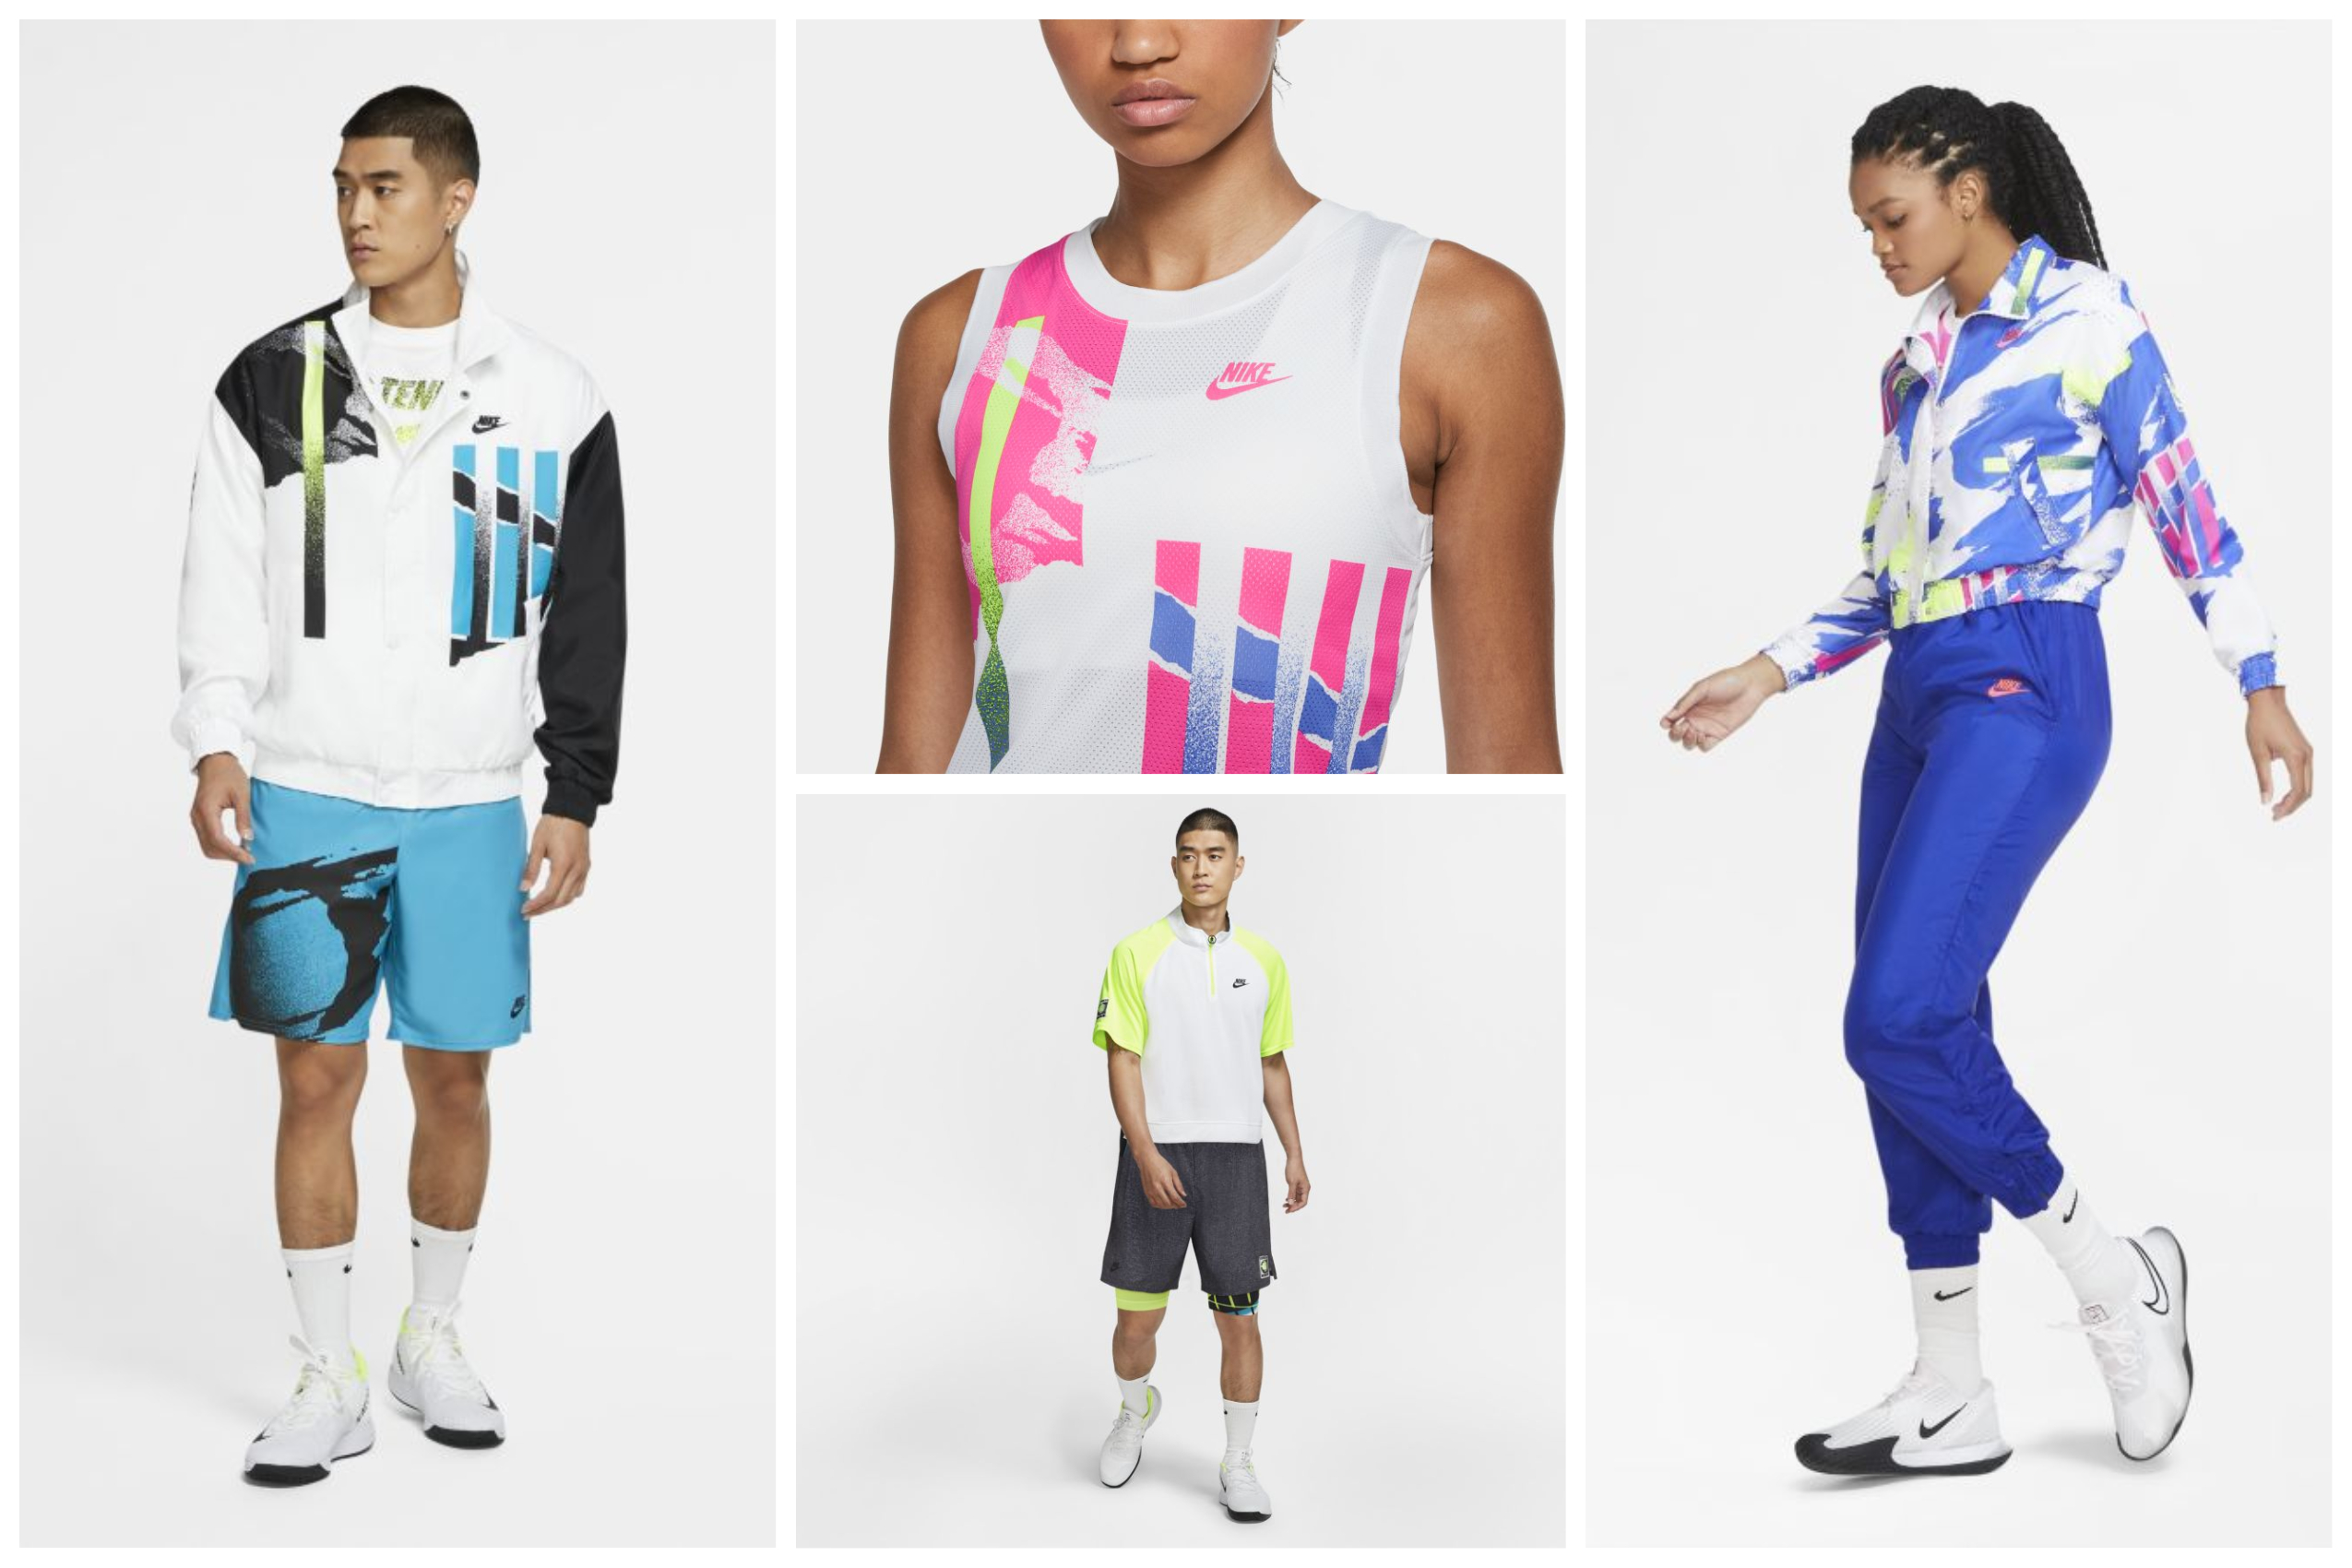 Retro Vibes and Bright Colors- The Nike New York Slam Apparel Collection is Here!